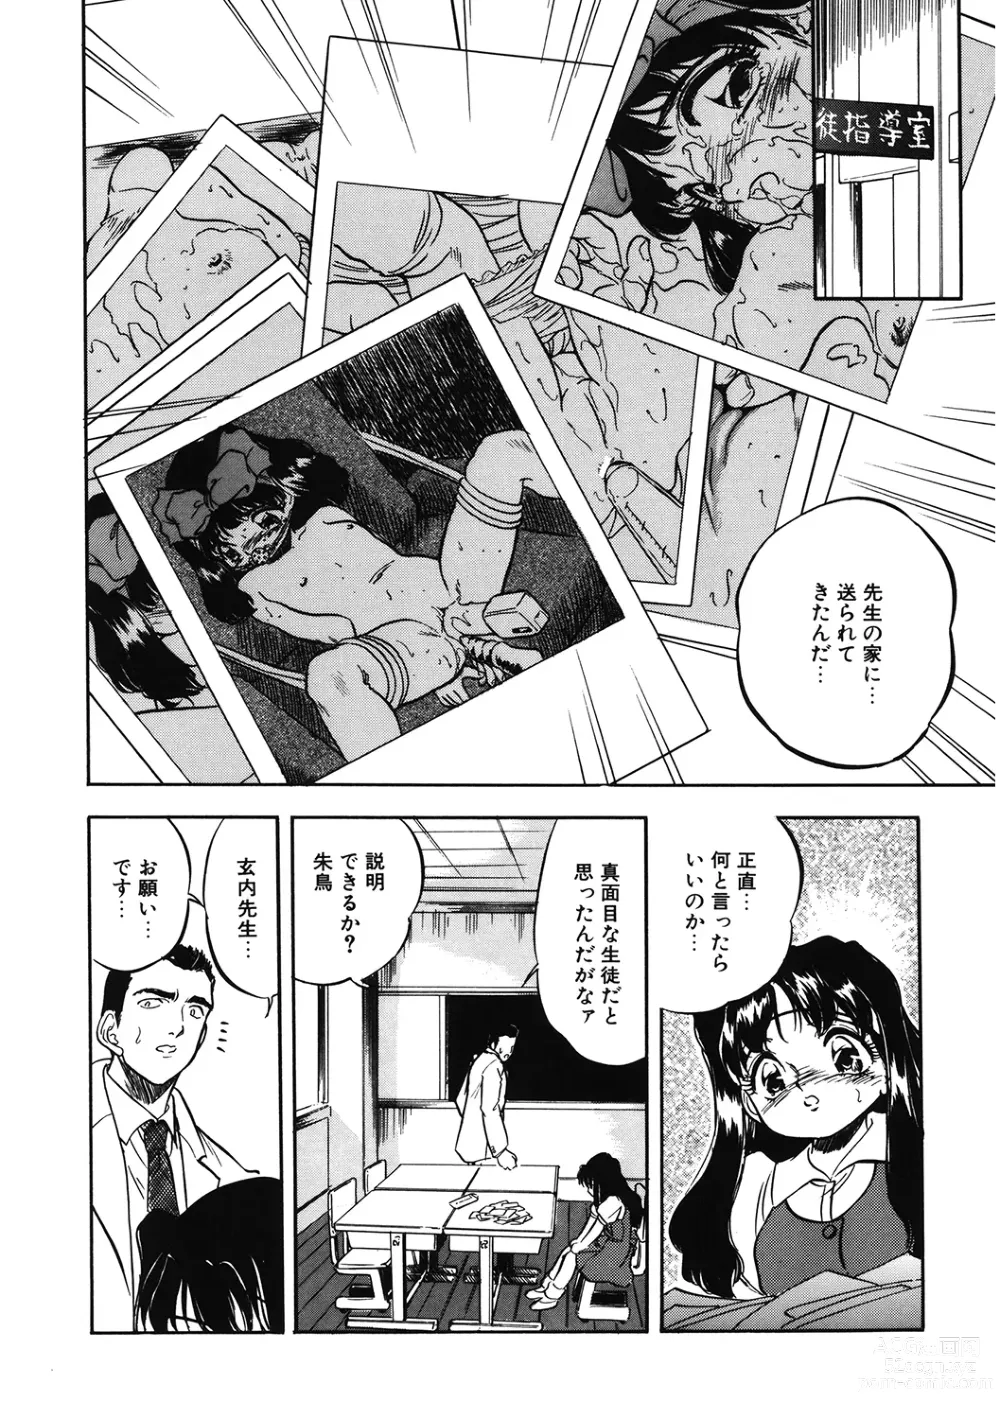 Page 10 of manga LQ -Little Queen- Vol. 52